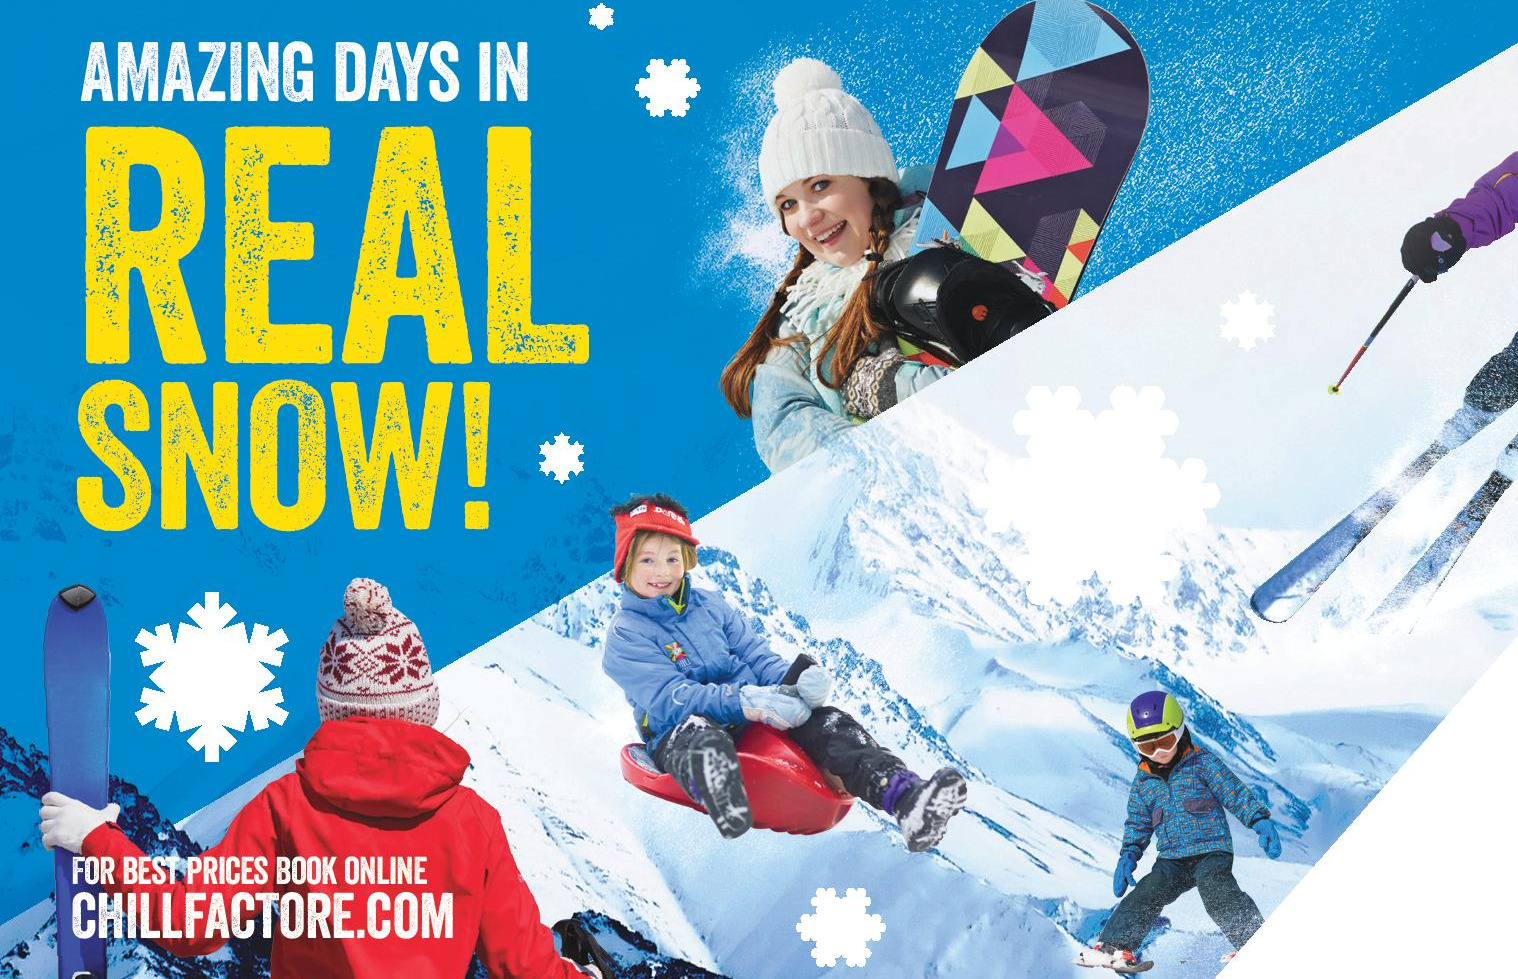 Chill Factore - YourDaysOut